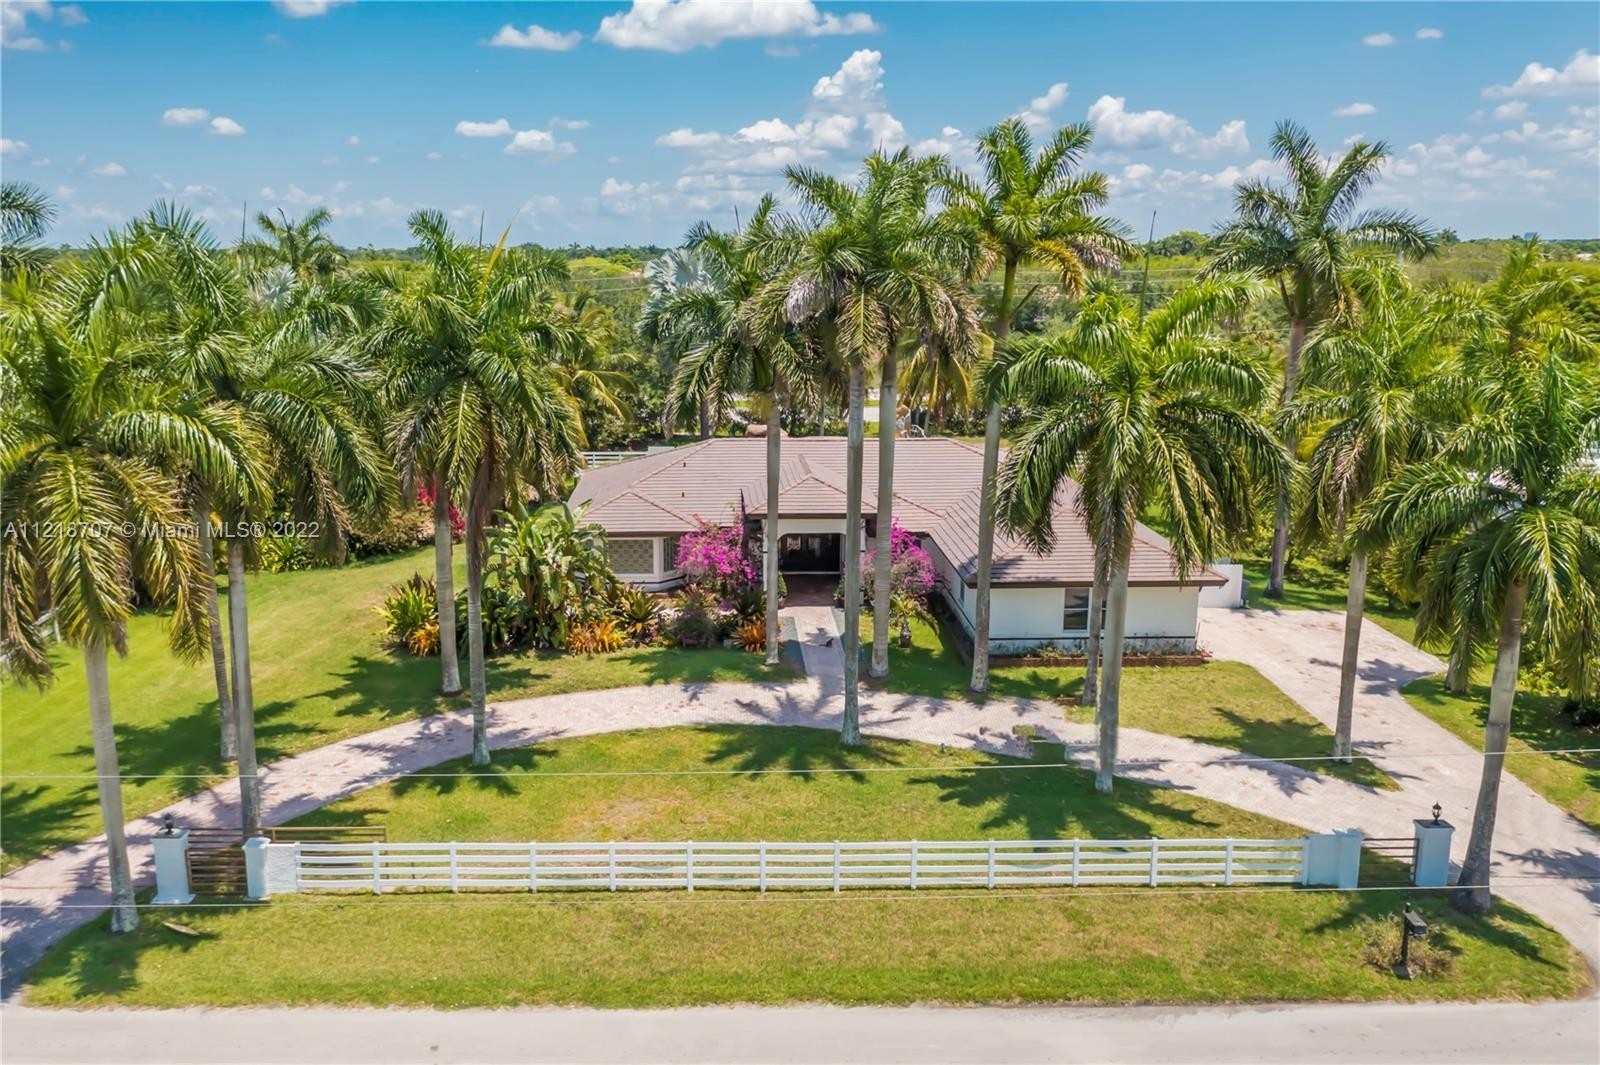 Single Family Home at Southwest Ranches, FL 33331